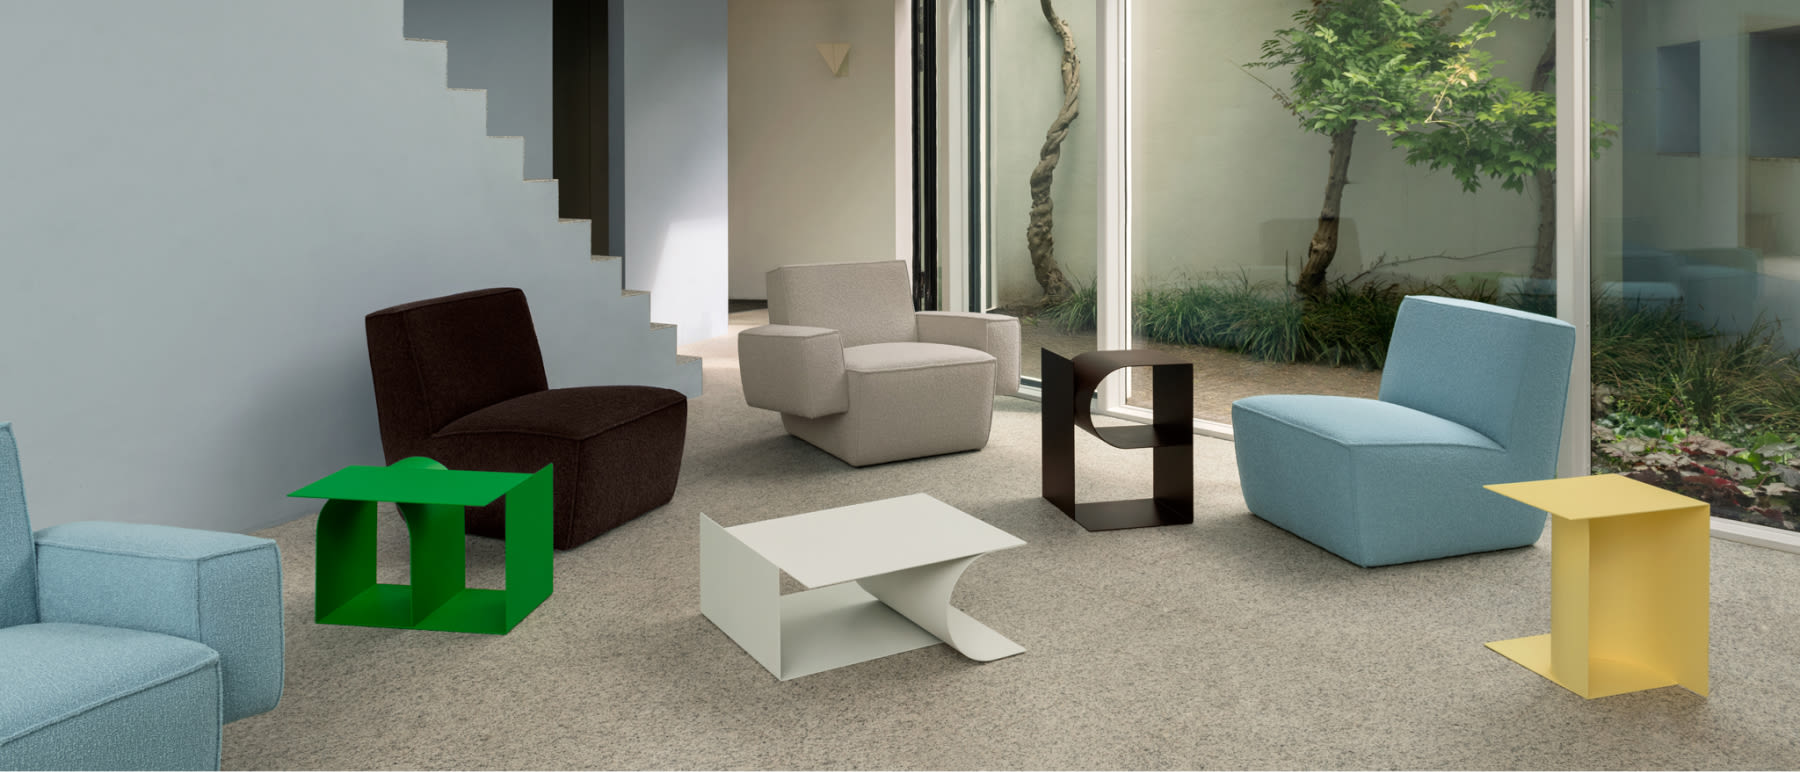 A lifestyle image featuring Hunk Lounge Chair, Hunk Lounge Chair with Armrests, and Glyph Side Tables Alpha, Beta and Gamma.